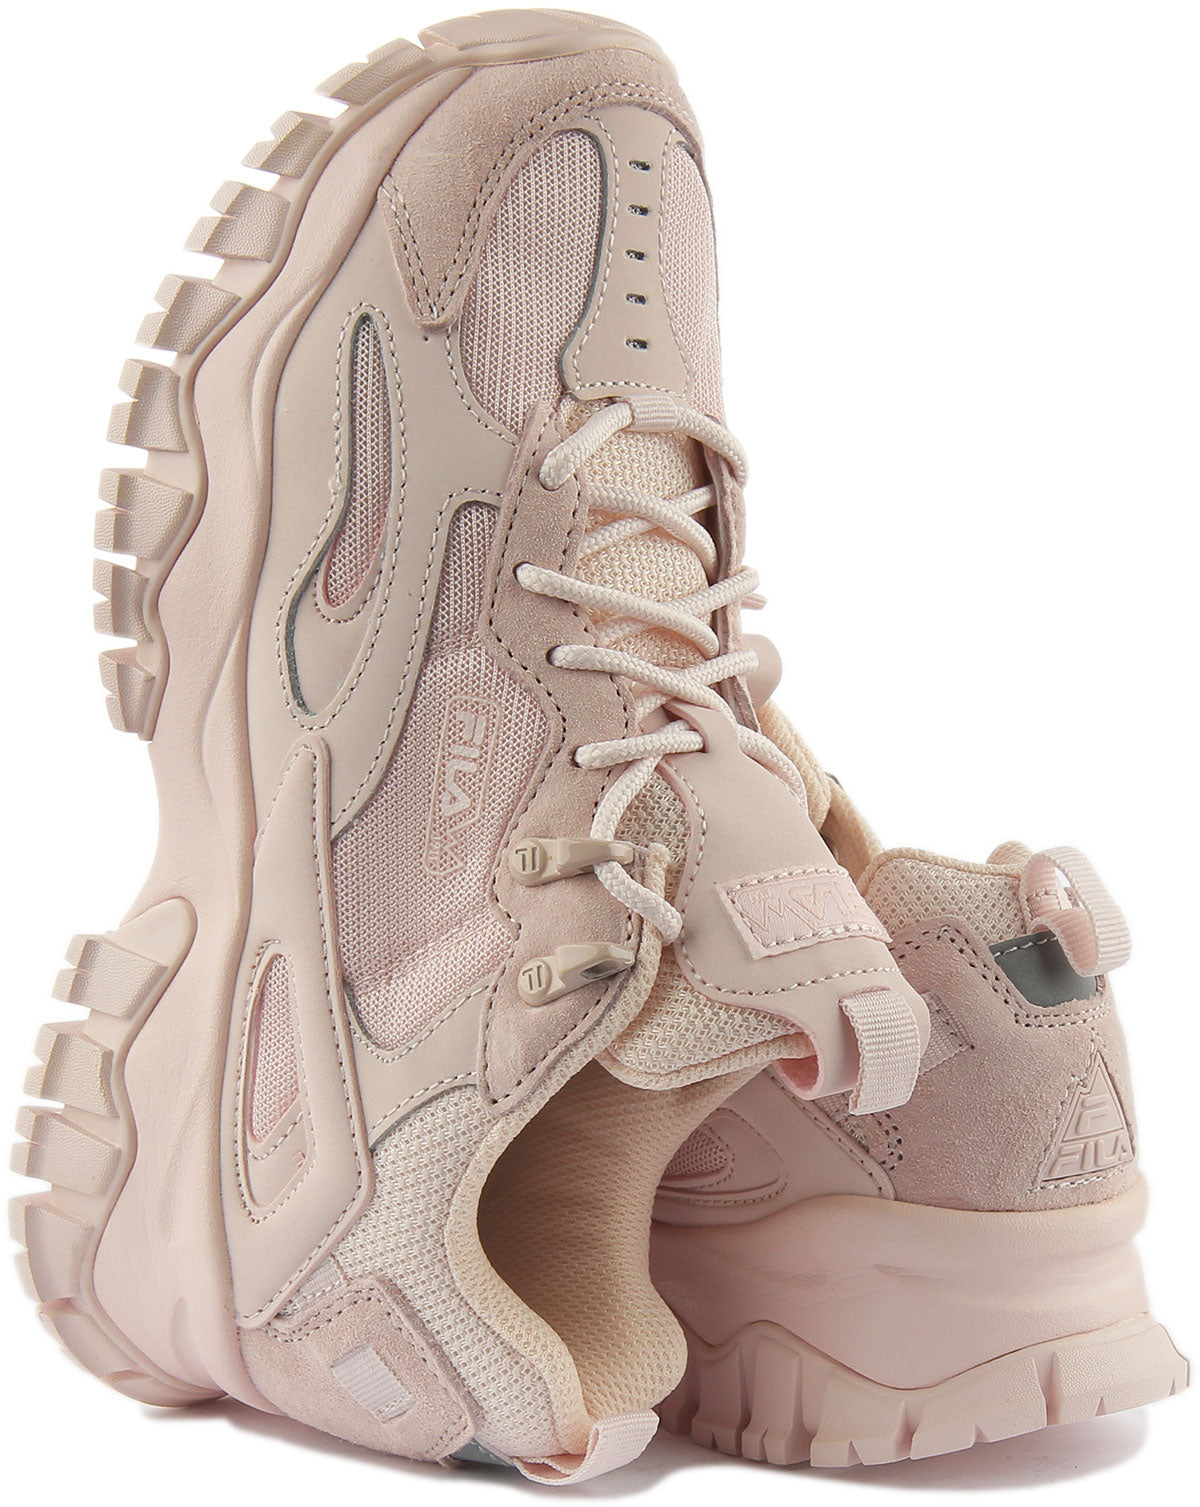 Fila Ray Tracer 2 In Rose For Women | Hiking Lace up Trainer